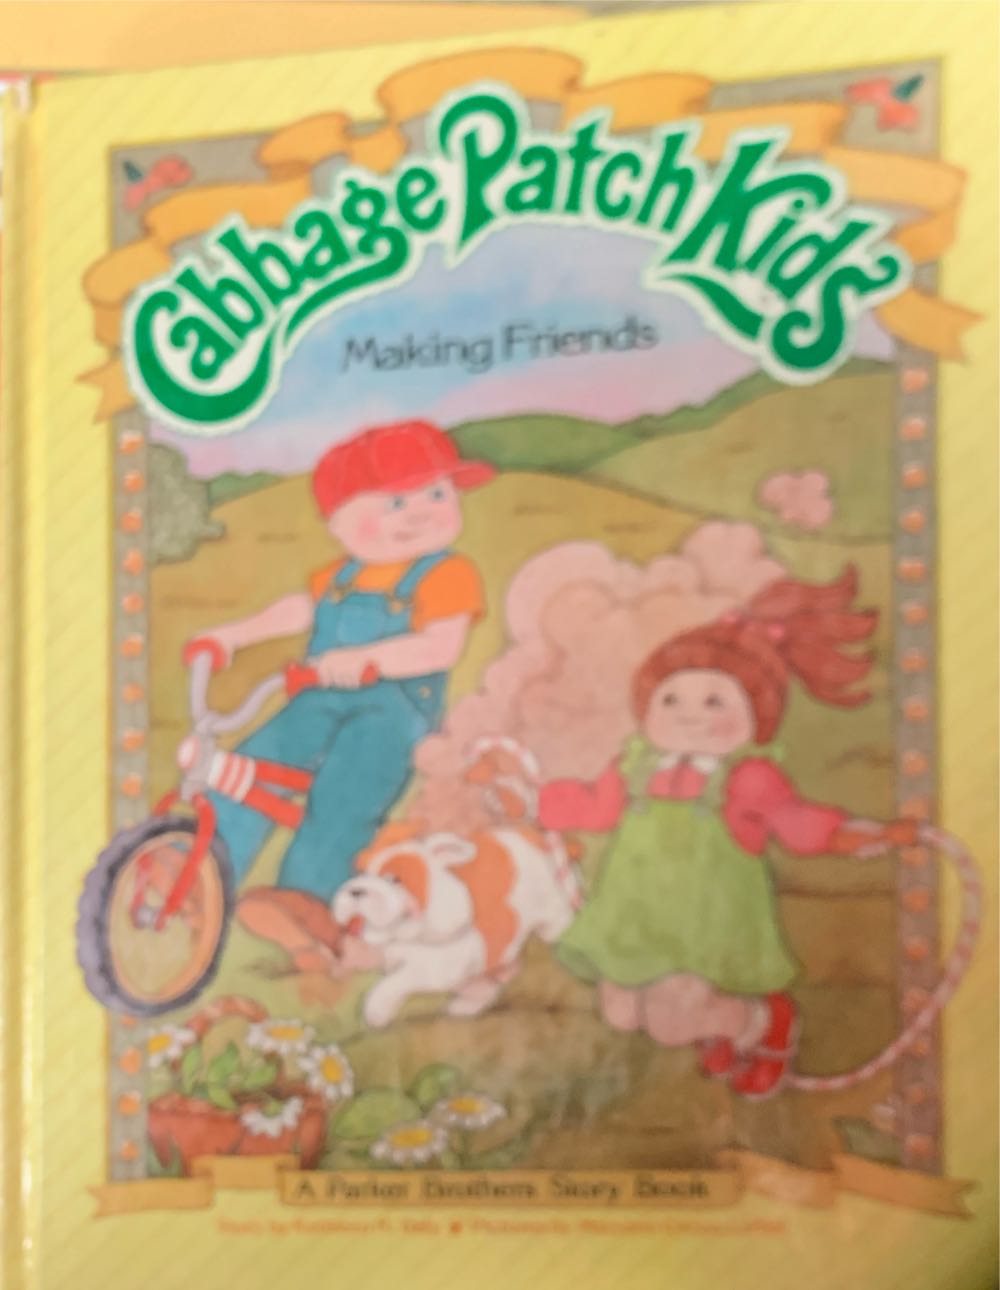 Garbage Patch Kids - Kathleen N. Daly book collectible [Barcode 9780930313272] - Main Image 1